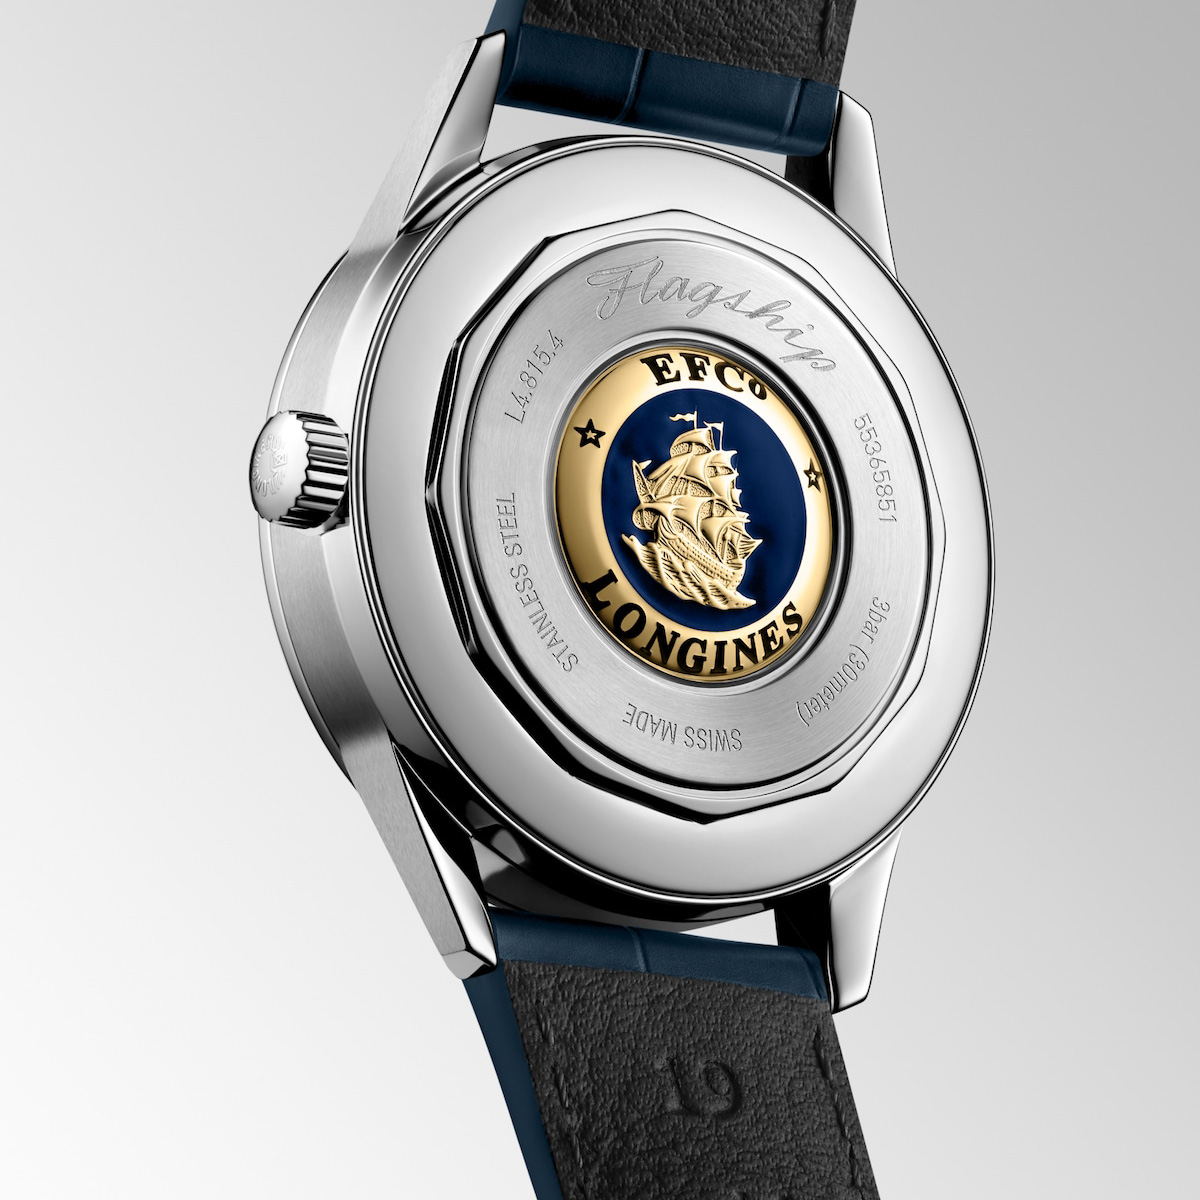 Longines Flagship Heritage Moonphase Blue Dial Blue Leather Strap 